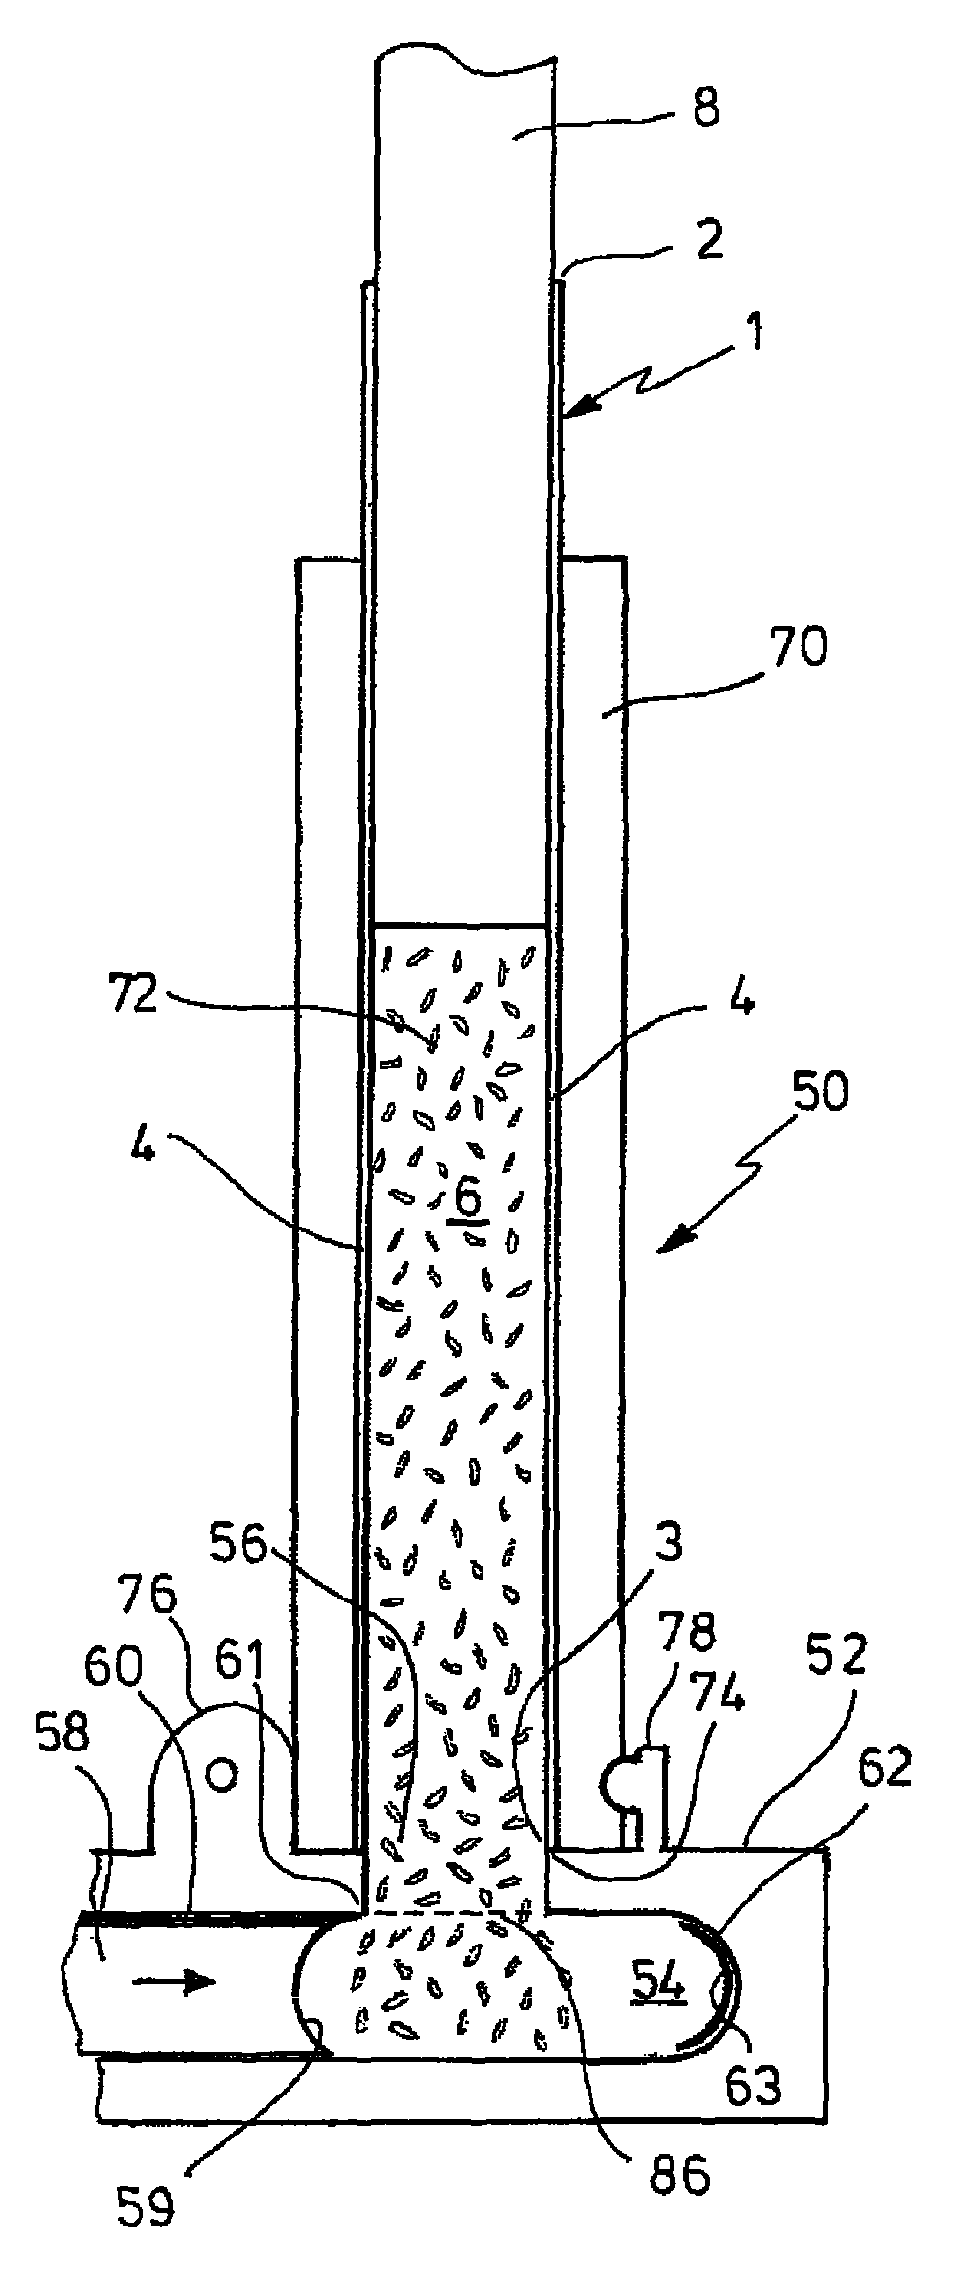 System for self-assembly of cigarettes